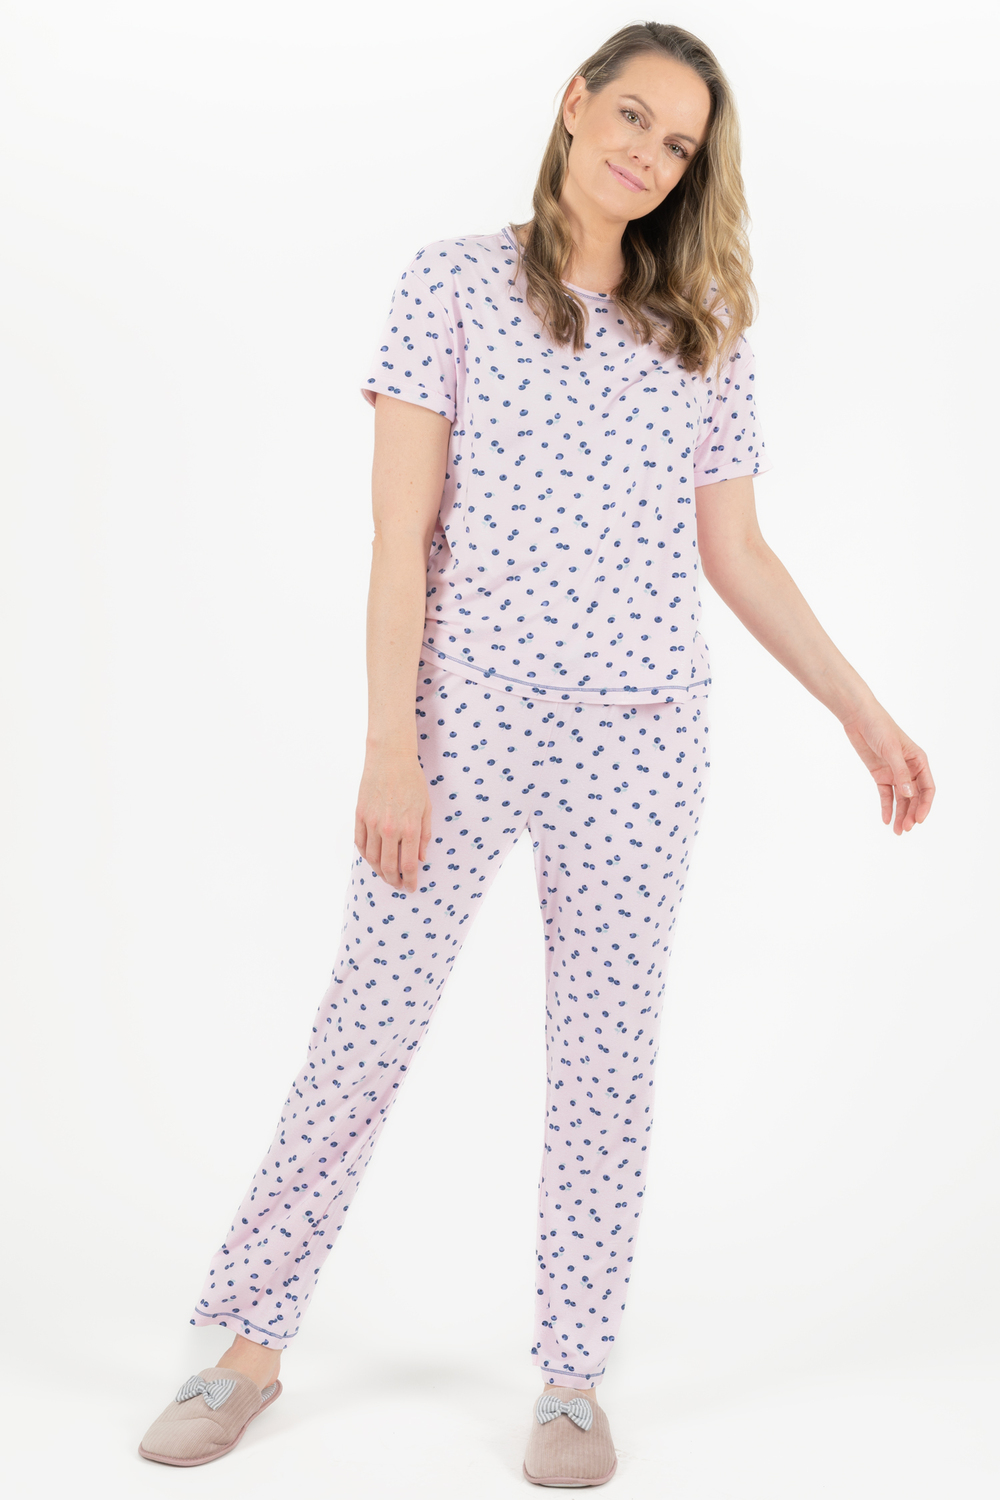 Charmour - Soft touch PJ set - Blueberry pick